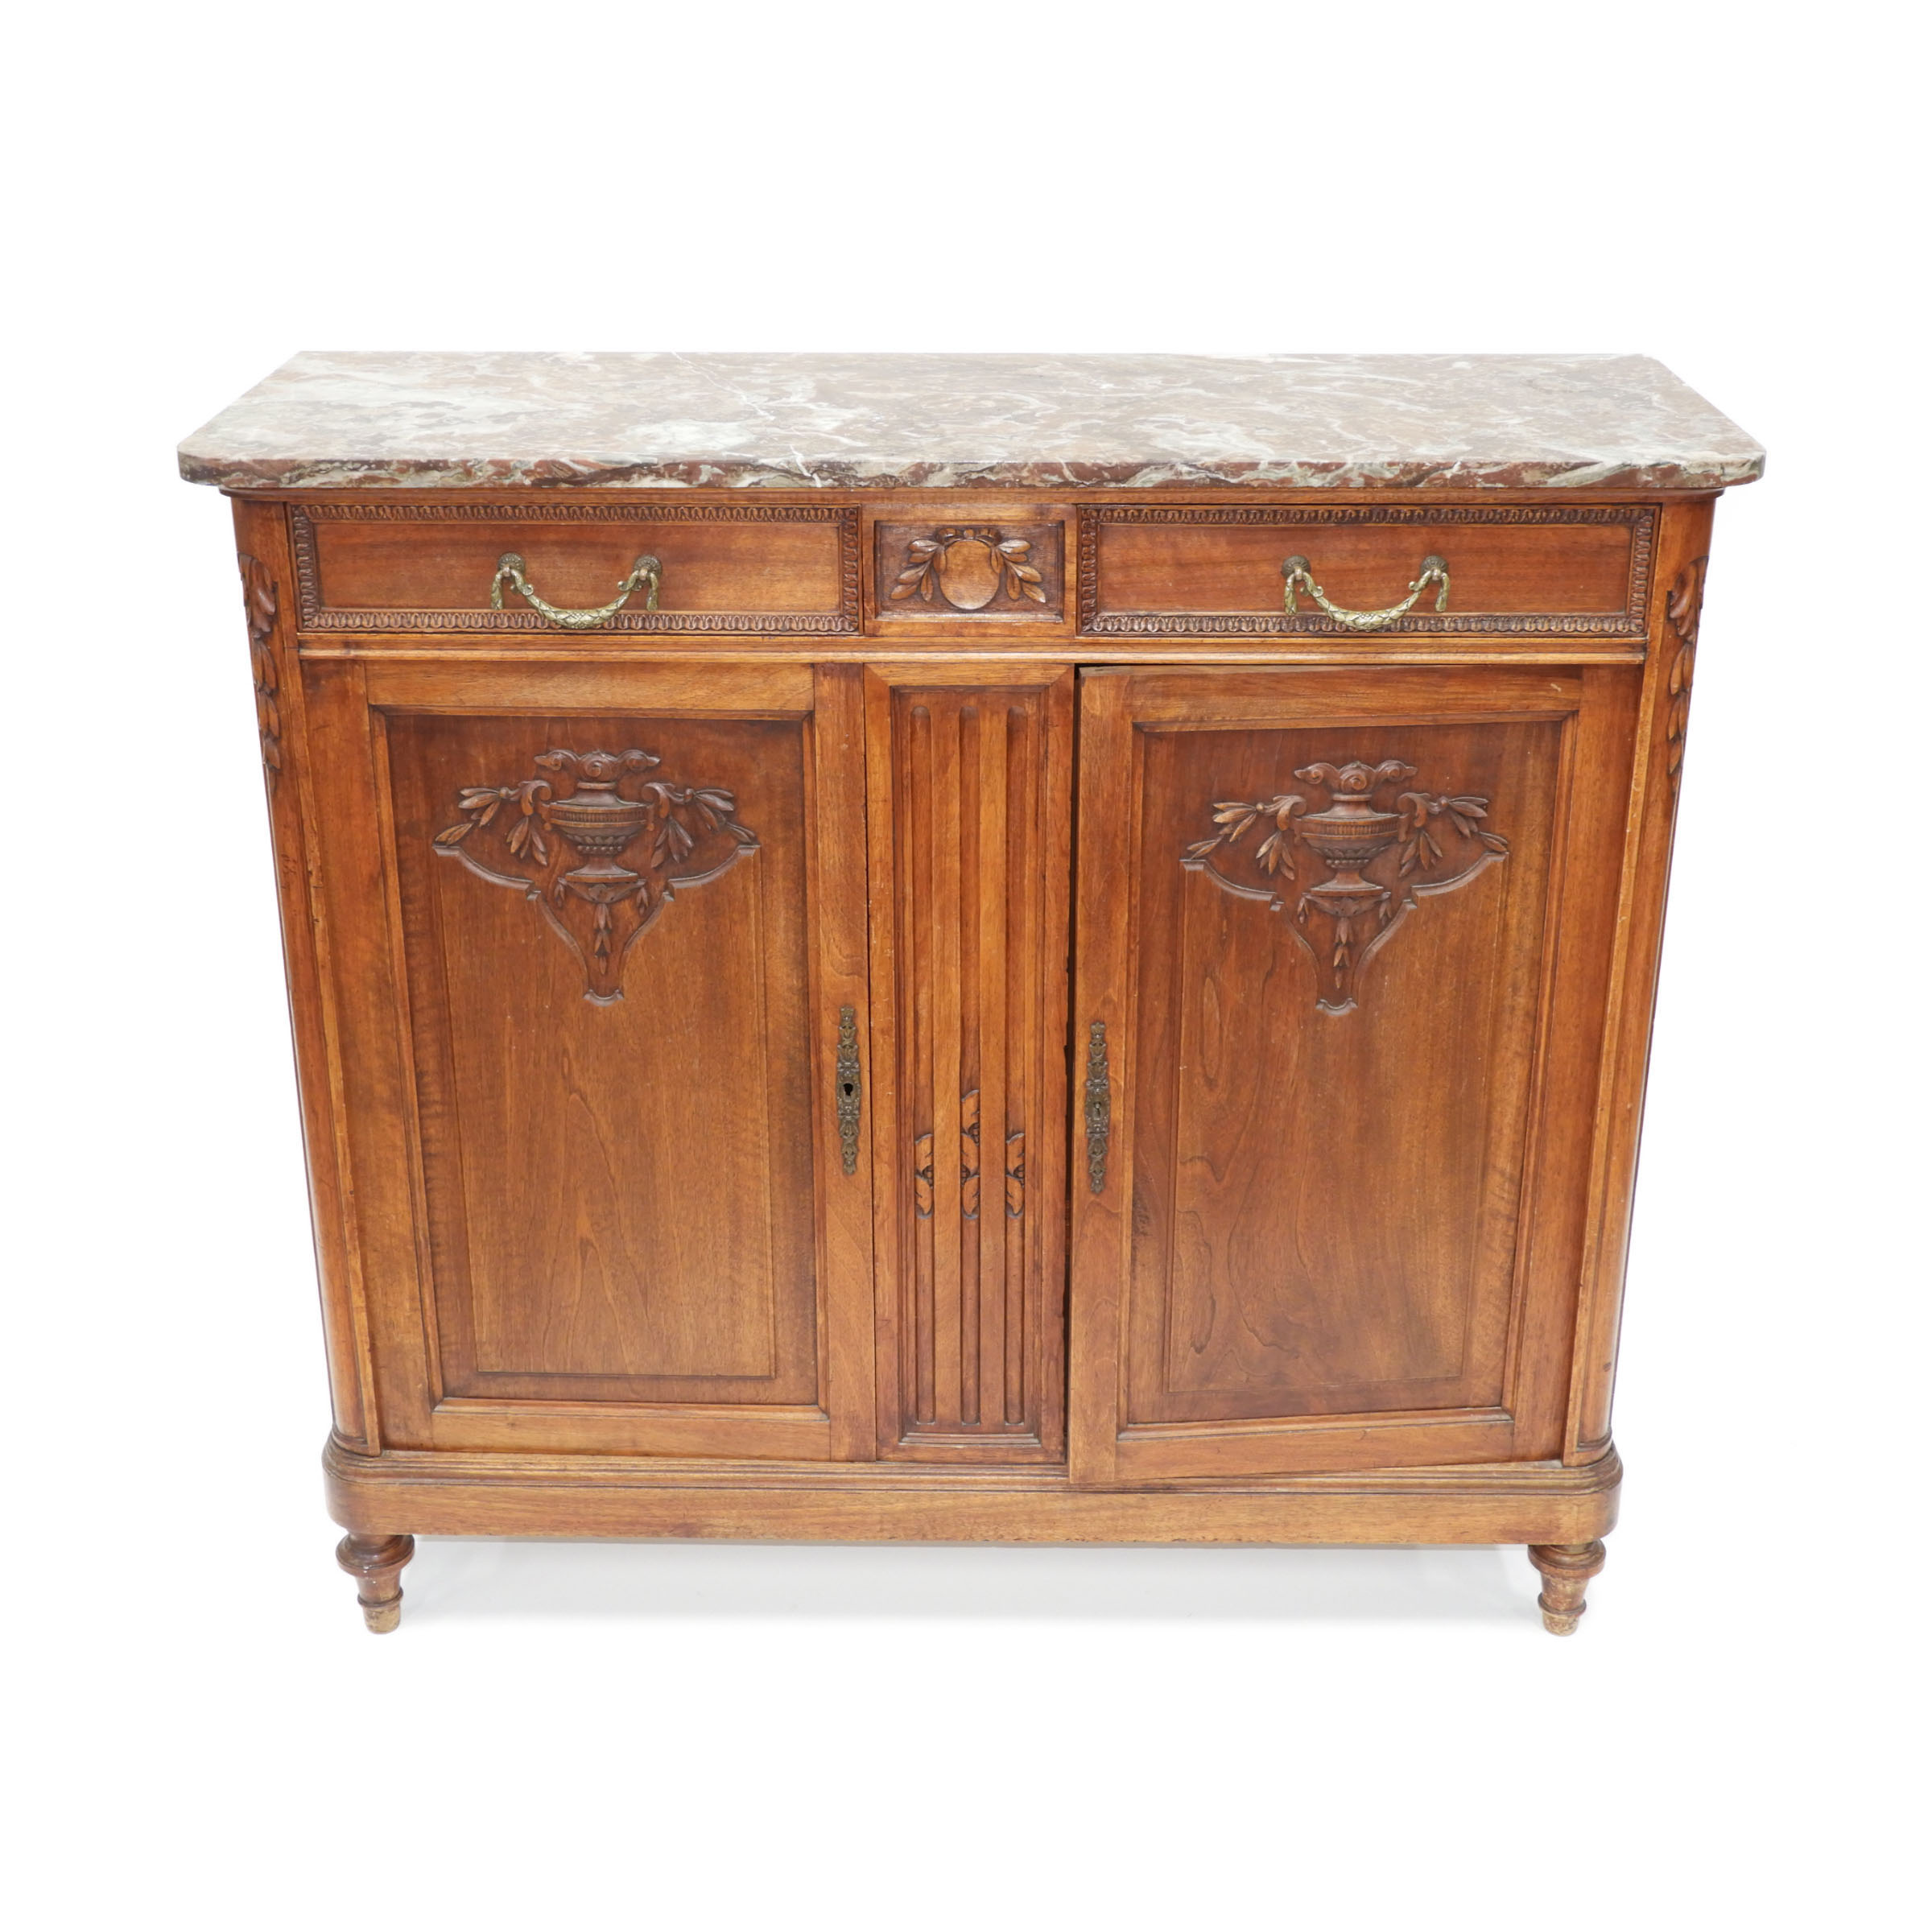 Continental Kilned and Carved Oak Marble Top Side Board, c.1900